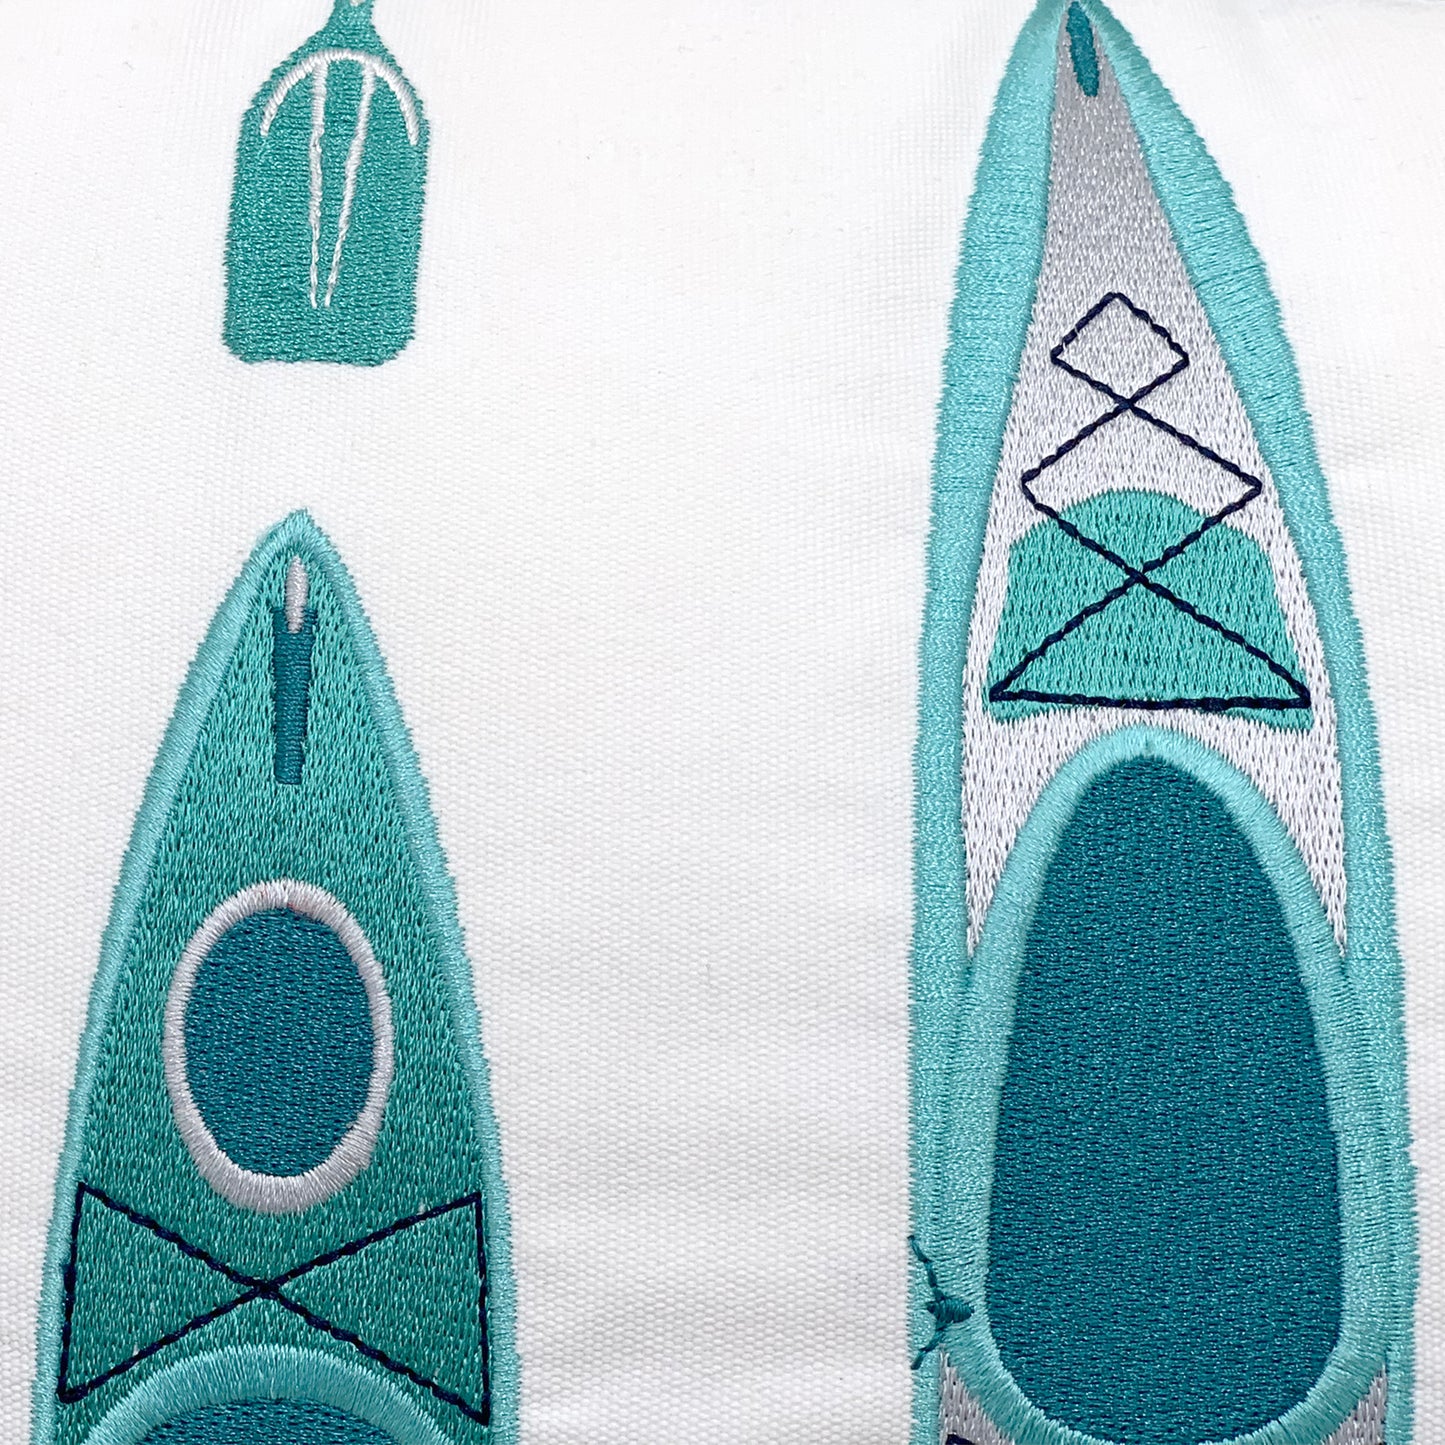 Detail shot of the Kayak Pattern Indoor Outdoor Pillow embroidery.